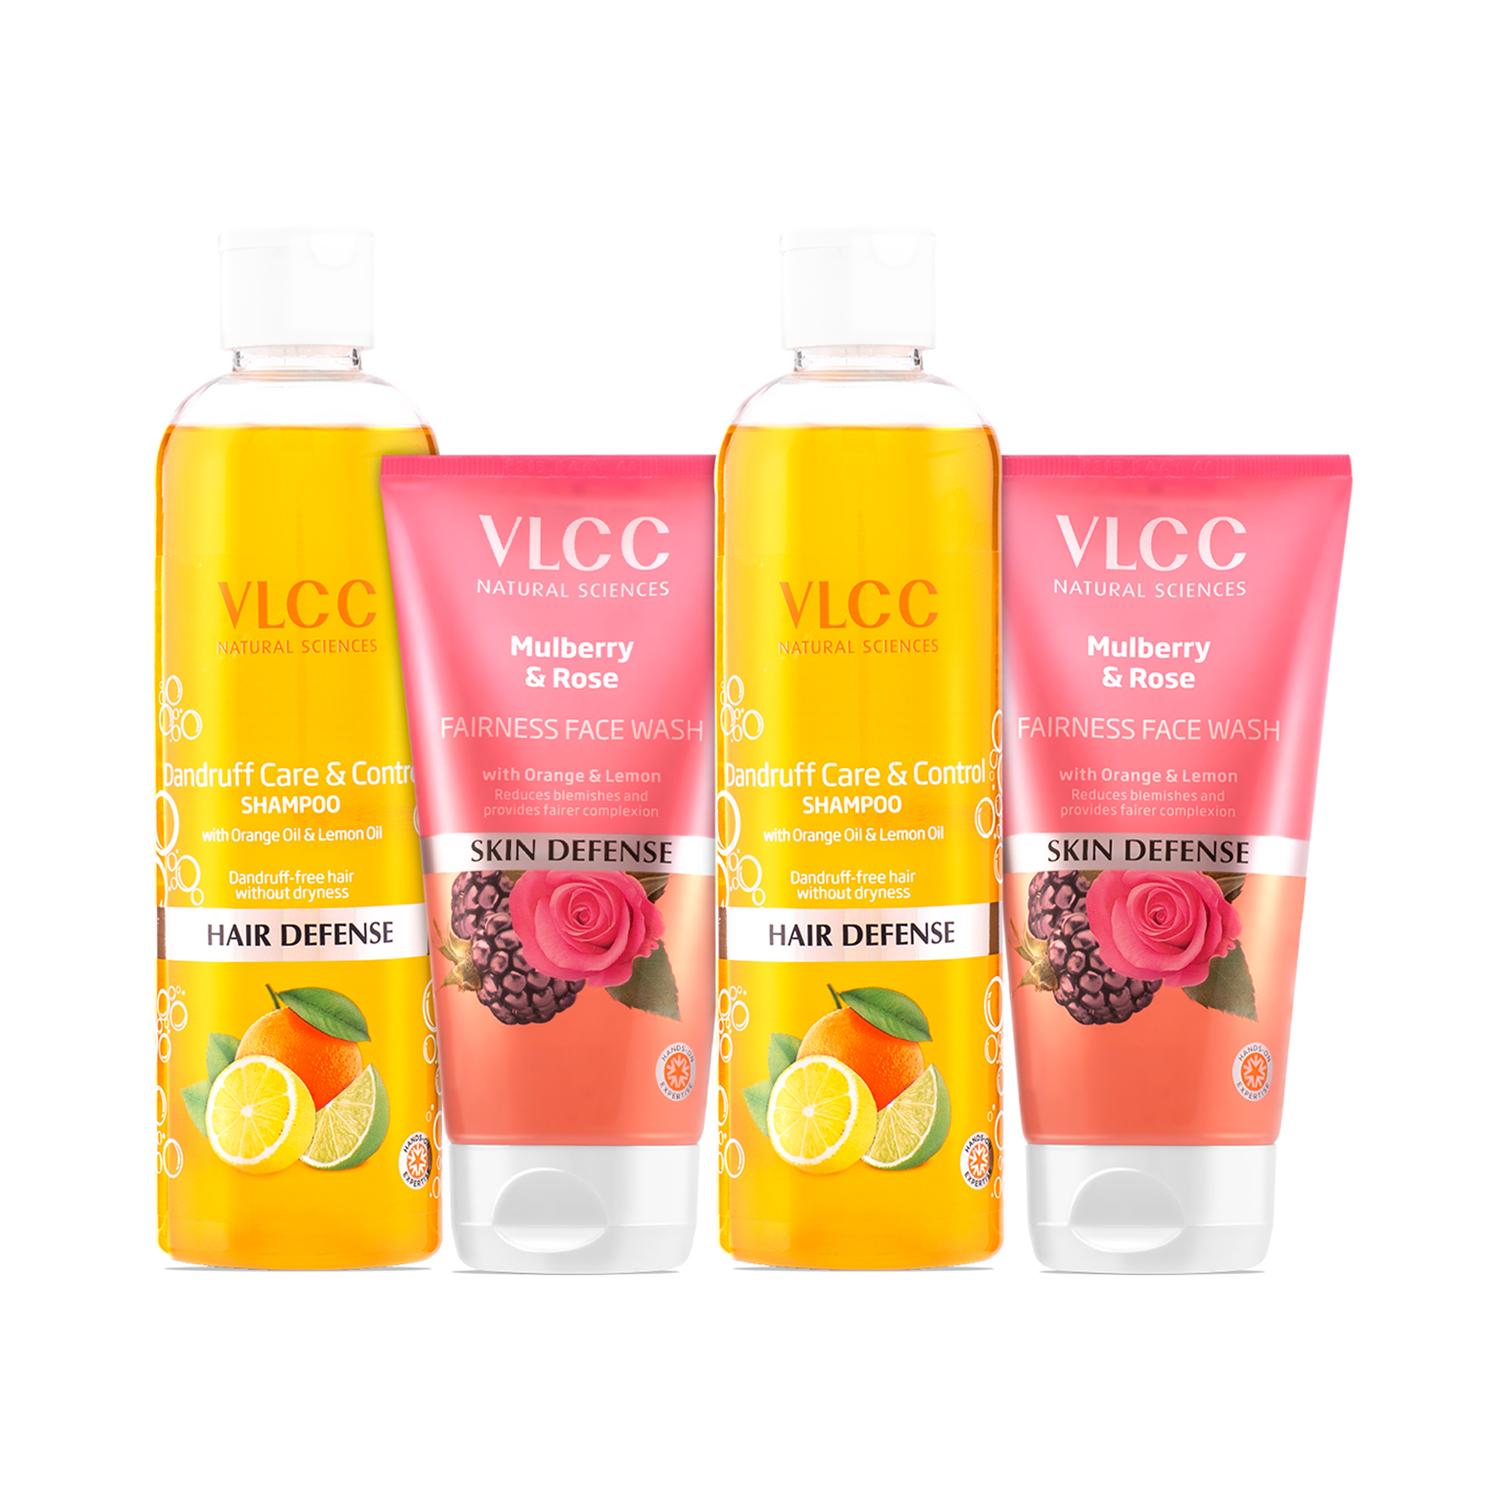 VLCC | VLCC Dandruff Care and Control Shampoo & Mulberry Rose Face Wash Combo